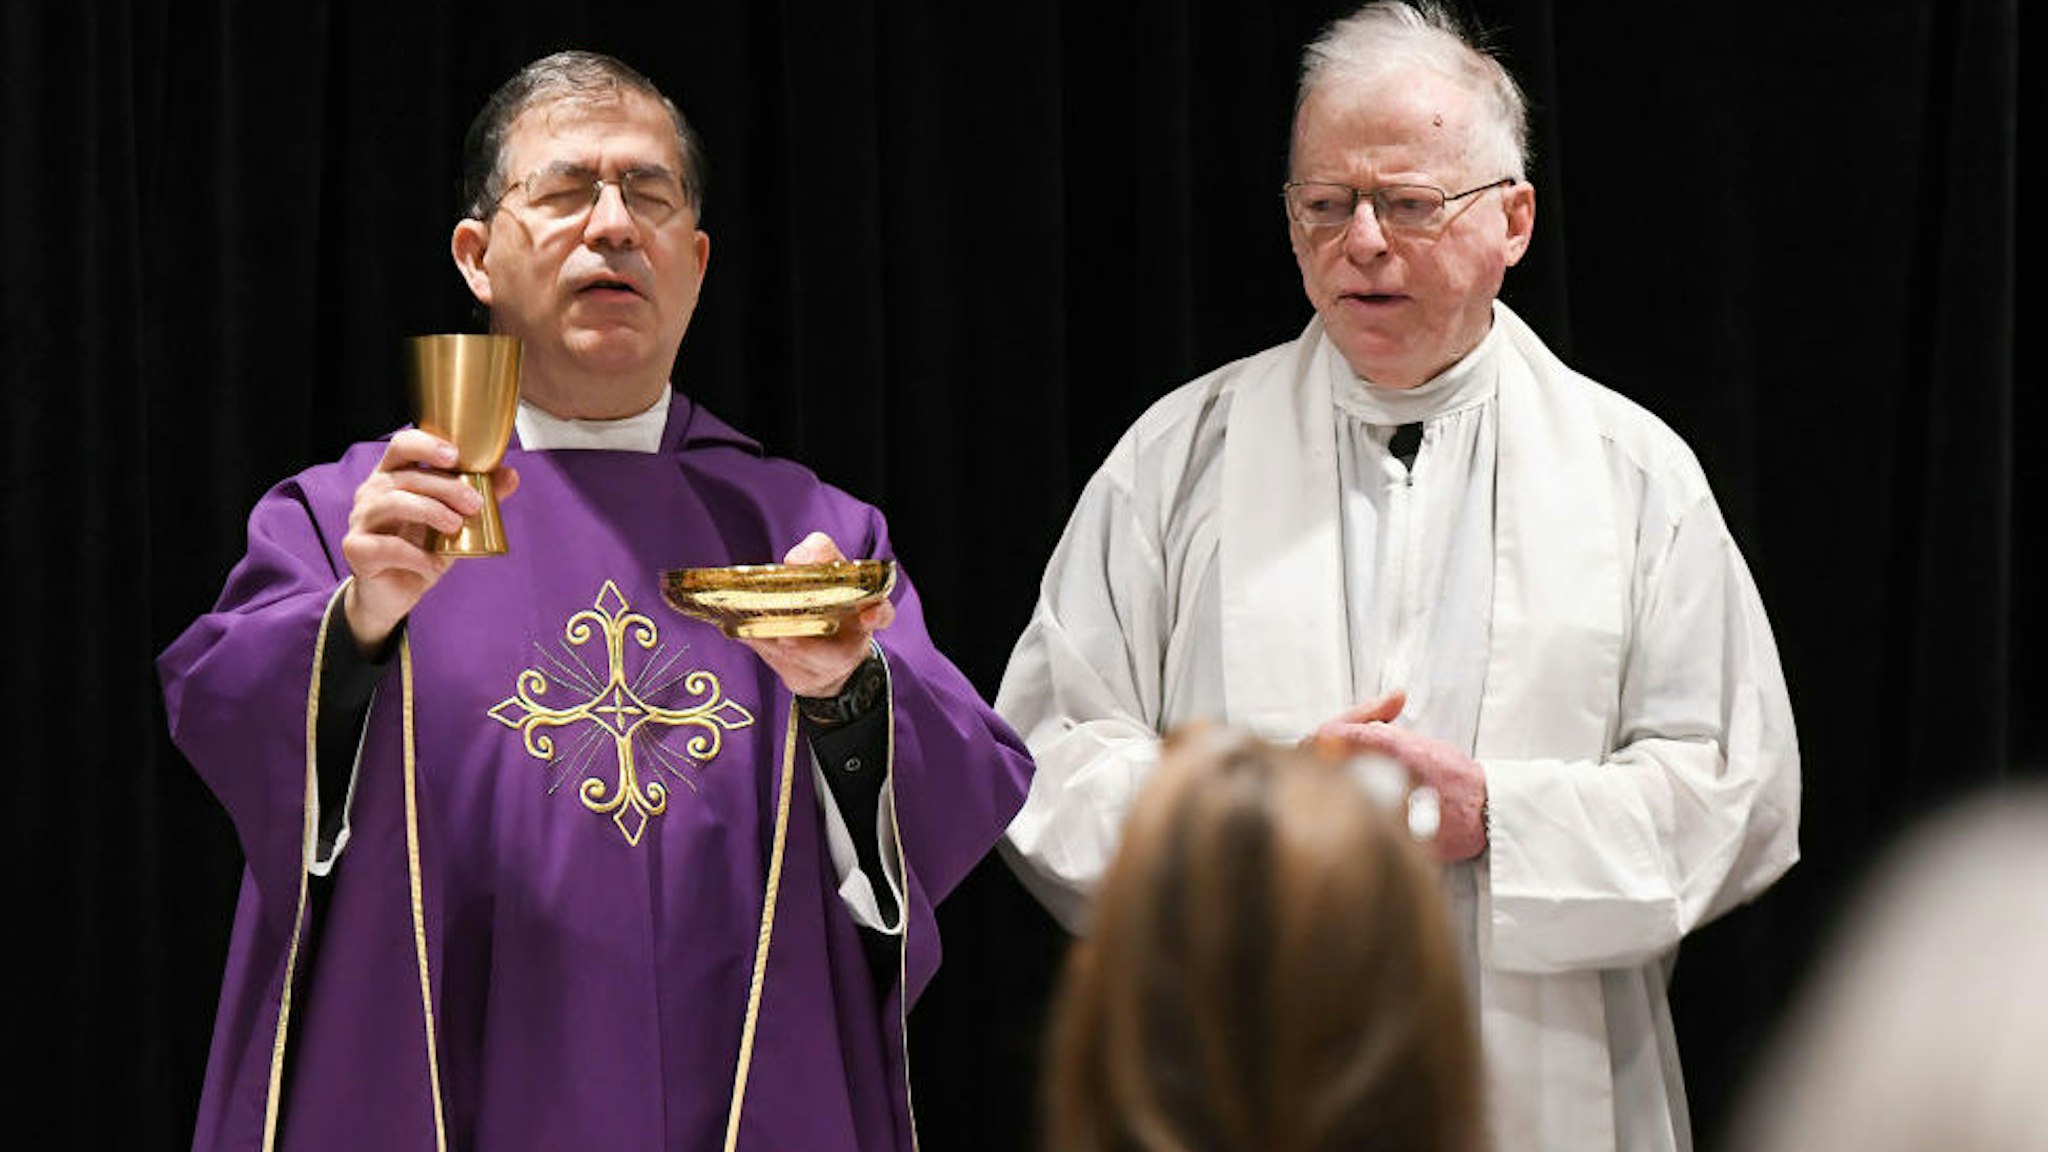 Father Frank Pavone, National Director of Priests for Life (left), celebrates Catholic Mass for attendees at the 2021 Conservative Political Action Conference at the Hyatt Regency. Former U.S. President Donald Trump is scheduled to speak on the final day of the conference.